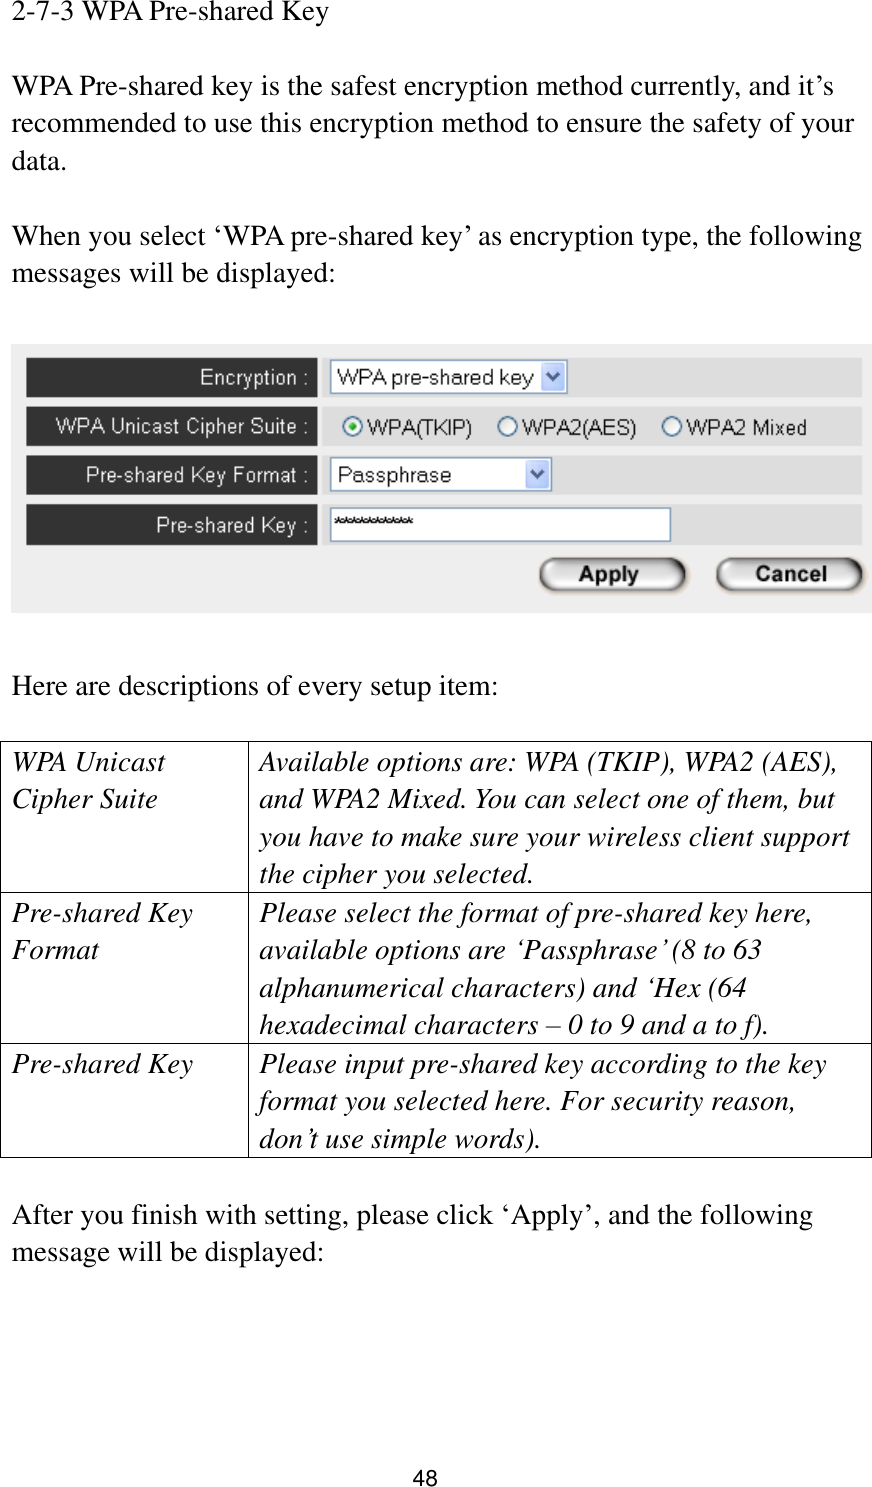 48 2-7-3 WPA Pre-shared Key  WPA Pre-shared key is the safest encryption method currently, and it‟s recommended to use this encryption method to ensure the safety of your data.  When you select „WPA pre-shared key‟ as encryption type, the following messages will be displayed:    Here are descriptions of every setup item:  WPA Unicast Cipher Suite  Available options are: WPA (TKIP), WPA2 (AES), and WPA2 Mixed. You can select one of them, but you have to make sure your wireless client support the cipher you selected. Pre-shared Key Format Please select the format of pre-shared key here, available options are „Passphrase‟ (8 to 63 alphanumerical characters) and „Hex (64 hexadecimal characters – 0 to 9 and a to f). Pre-shared Key Please input pre-shared key according to the key format you selected here. For security reason, don‟t use simple words).  After you finish with setting, please click „Apply‟, and the following message will be displayed:  